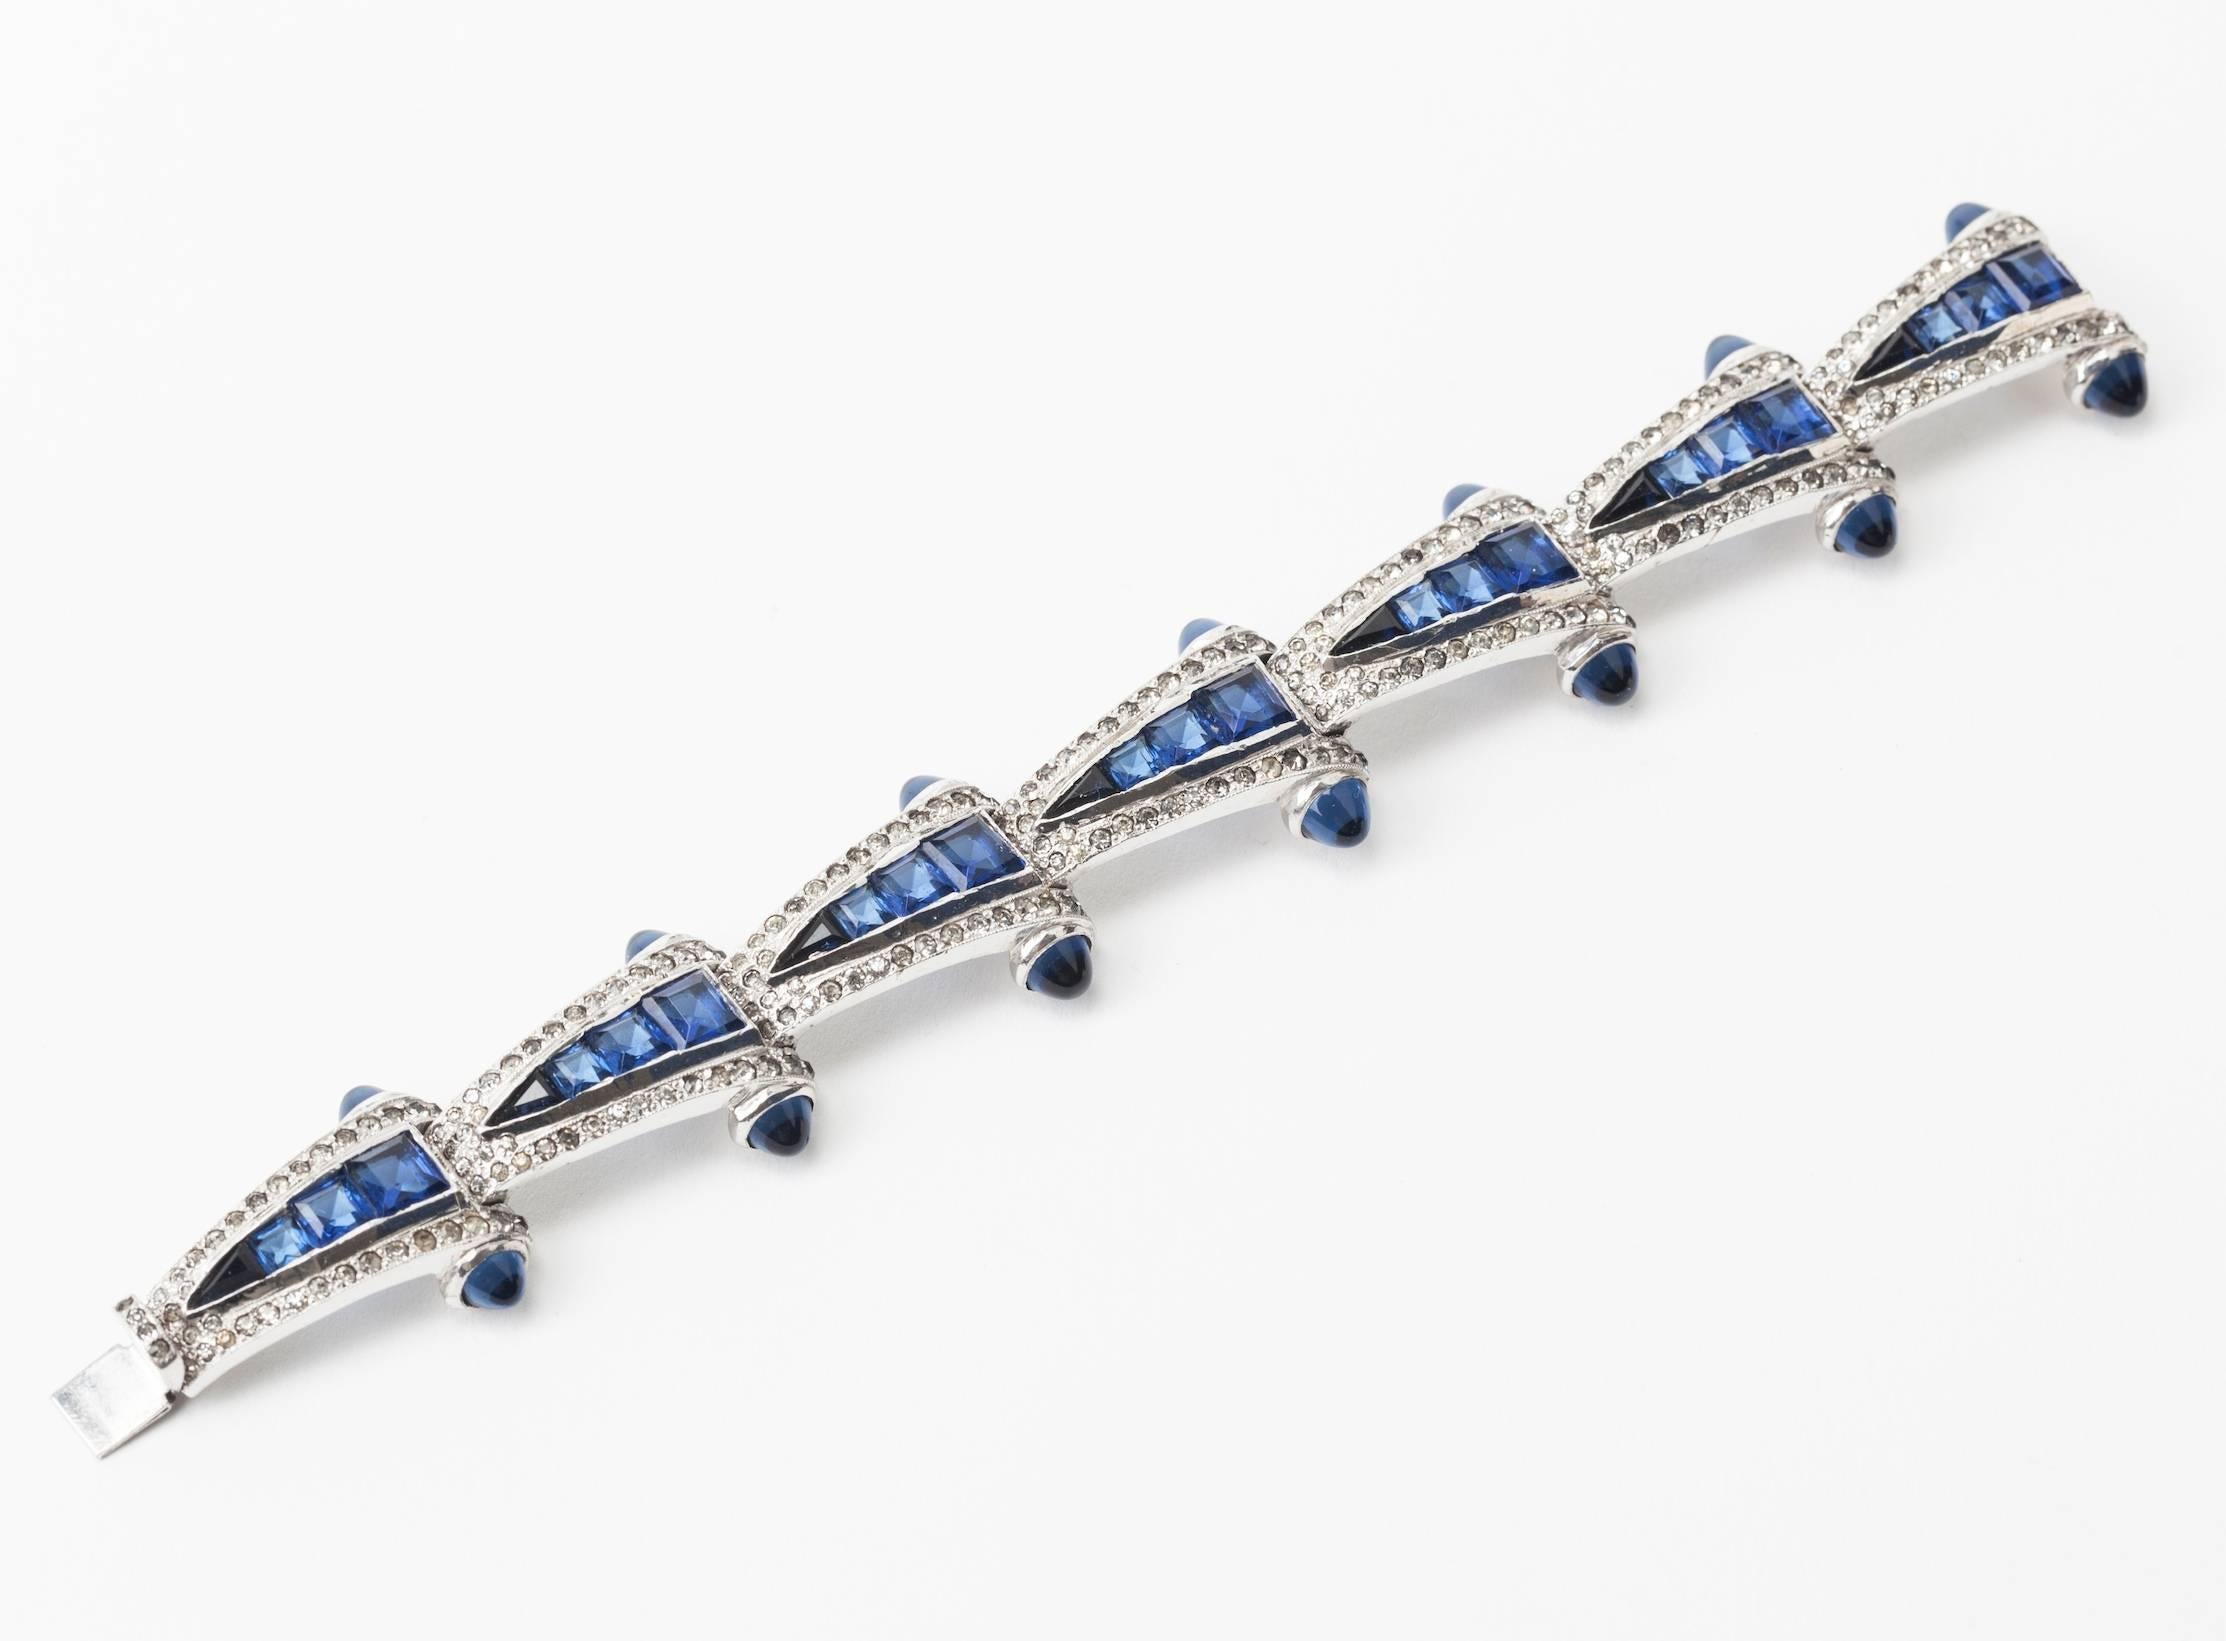 Wonderful Art Deco Bracelet with Calibre Set Faux Sapphires. Links are triangular in form with unusually cut faux sapphires edged in crystal pastes. 
High quality rhodium finish. Very possibly made by Ralph DeRosa in the Art Deco period. 7